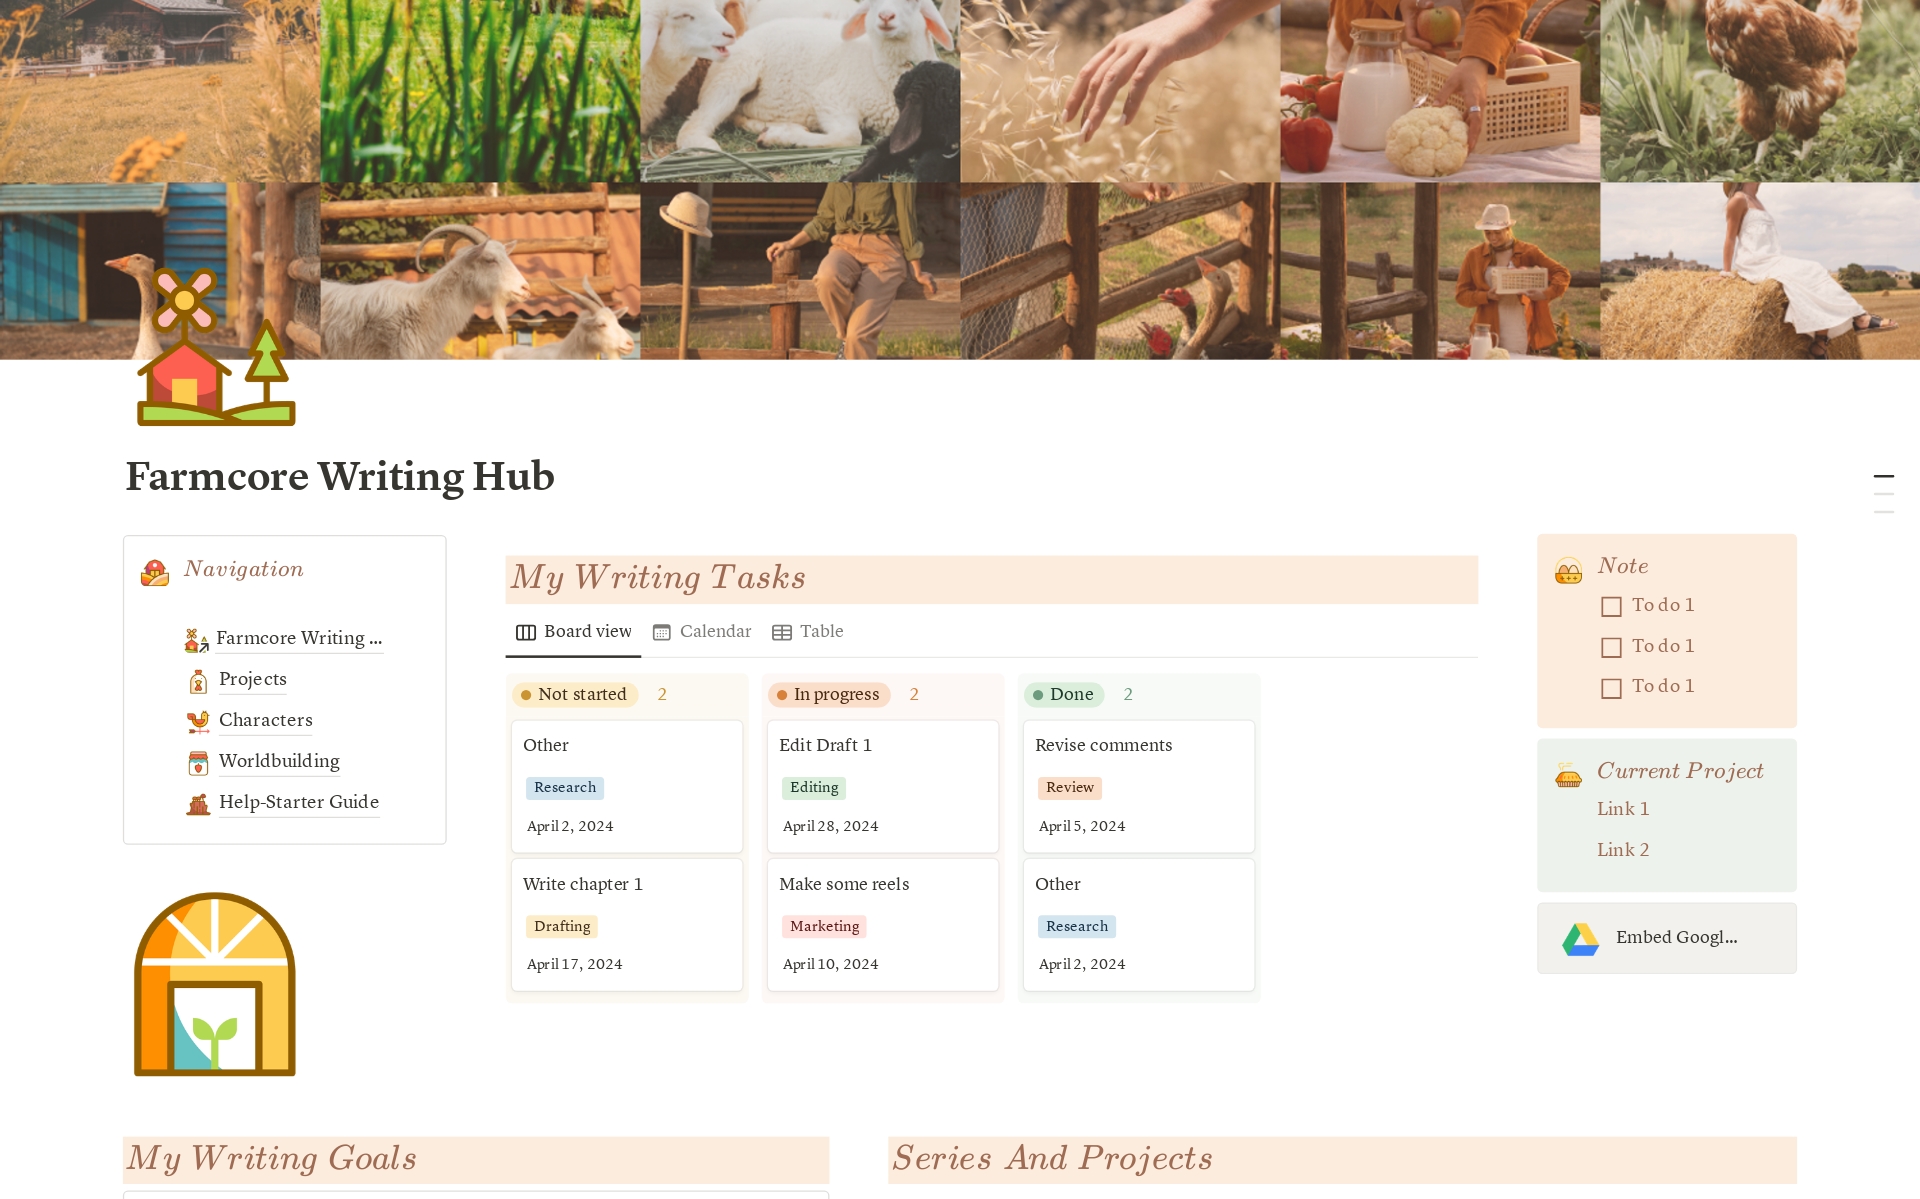 🌟The Writing Hub is ideal for novel writers who love writing aesthetically and visualizing their projects.
✨ Scrivener Customization + Google Docs collaboration
📒 Project tracker + Character sheets + Worldbuilding Wiki + Time/Word counter & more
💛Made by a writer for writers